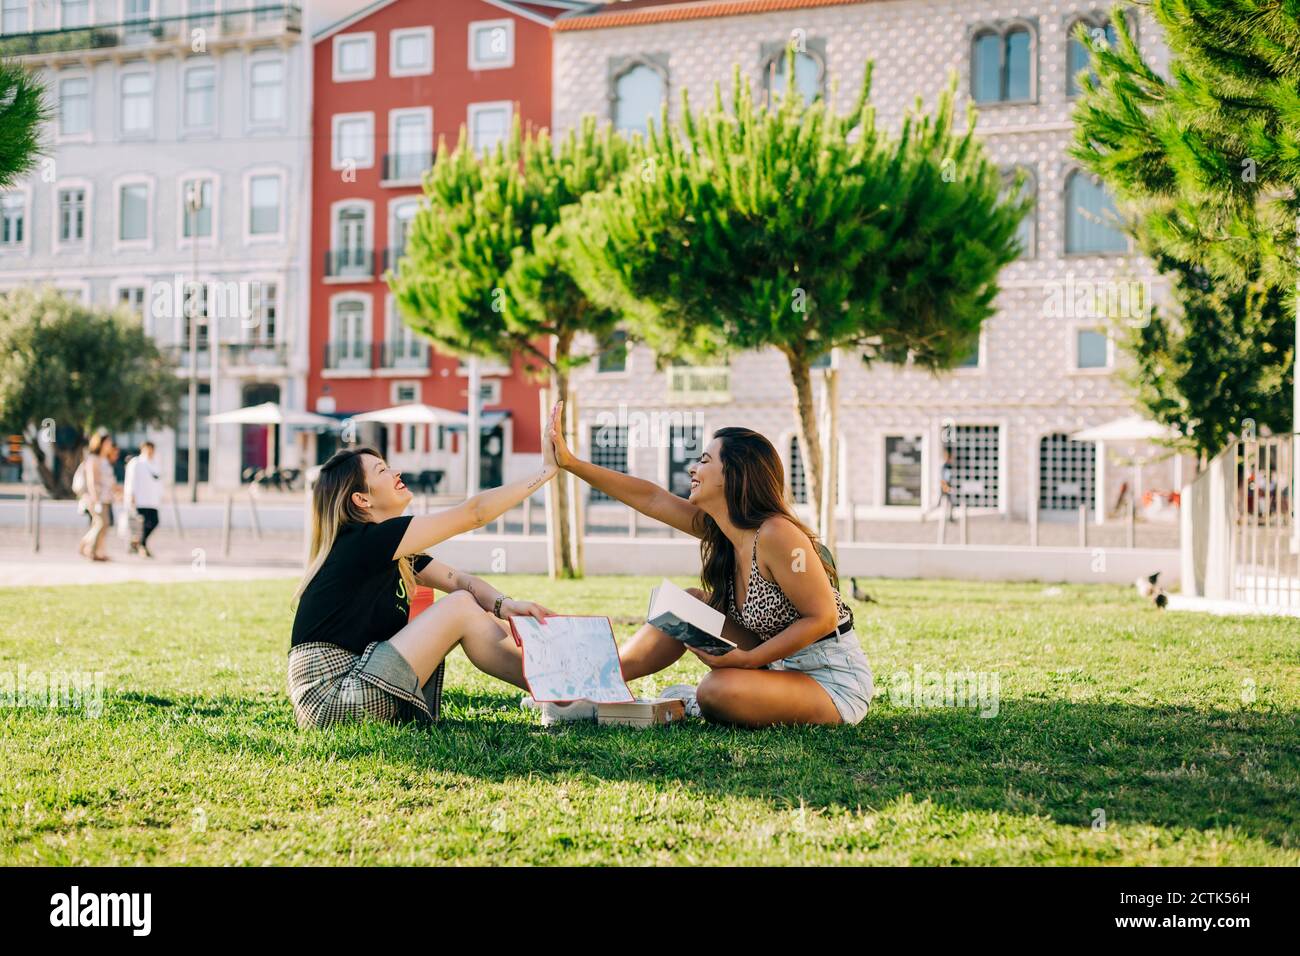 Female tourists giving high-five while sitting on grassy land against building in park Stock Photo